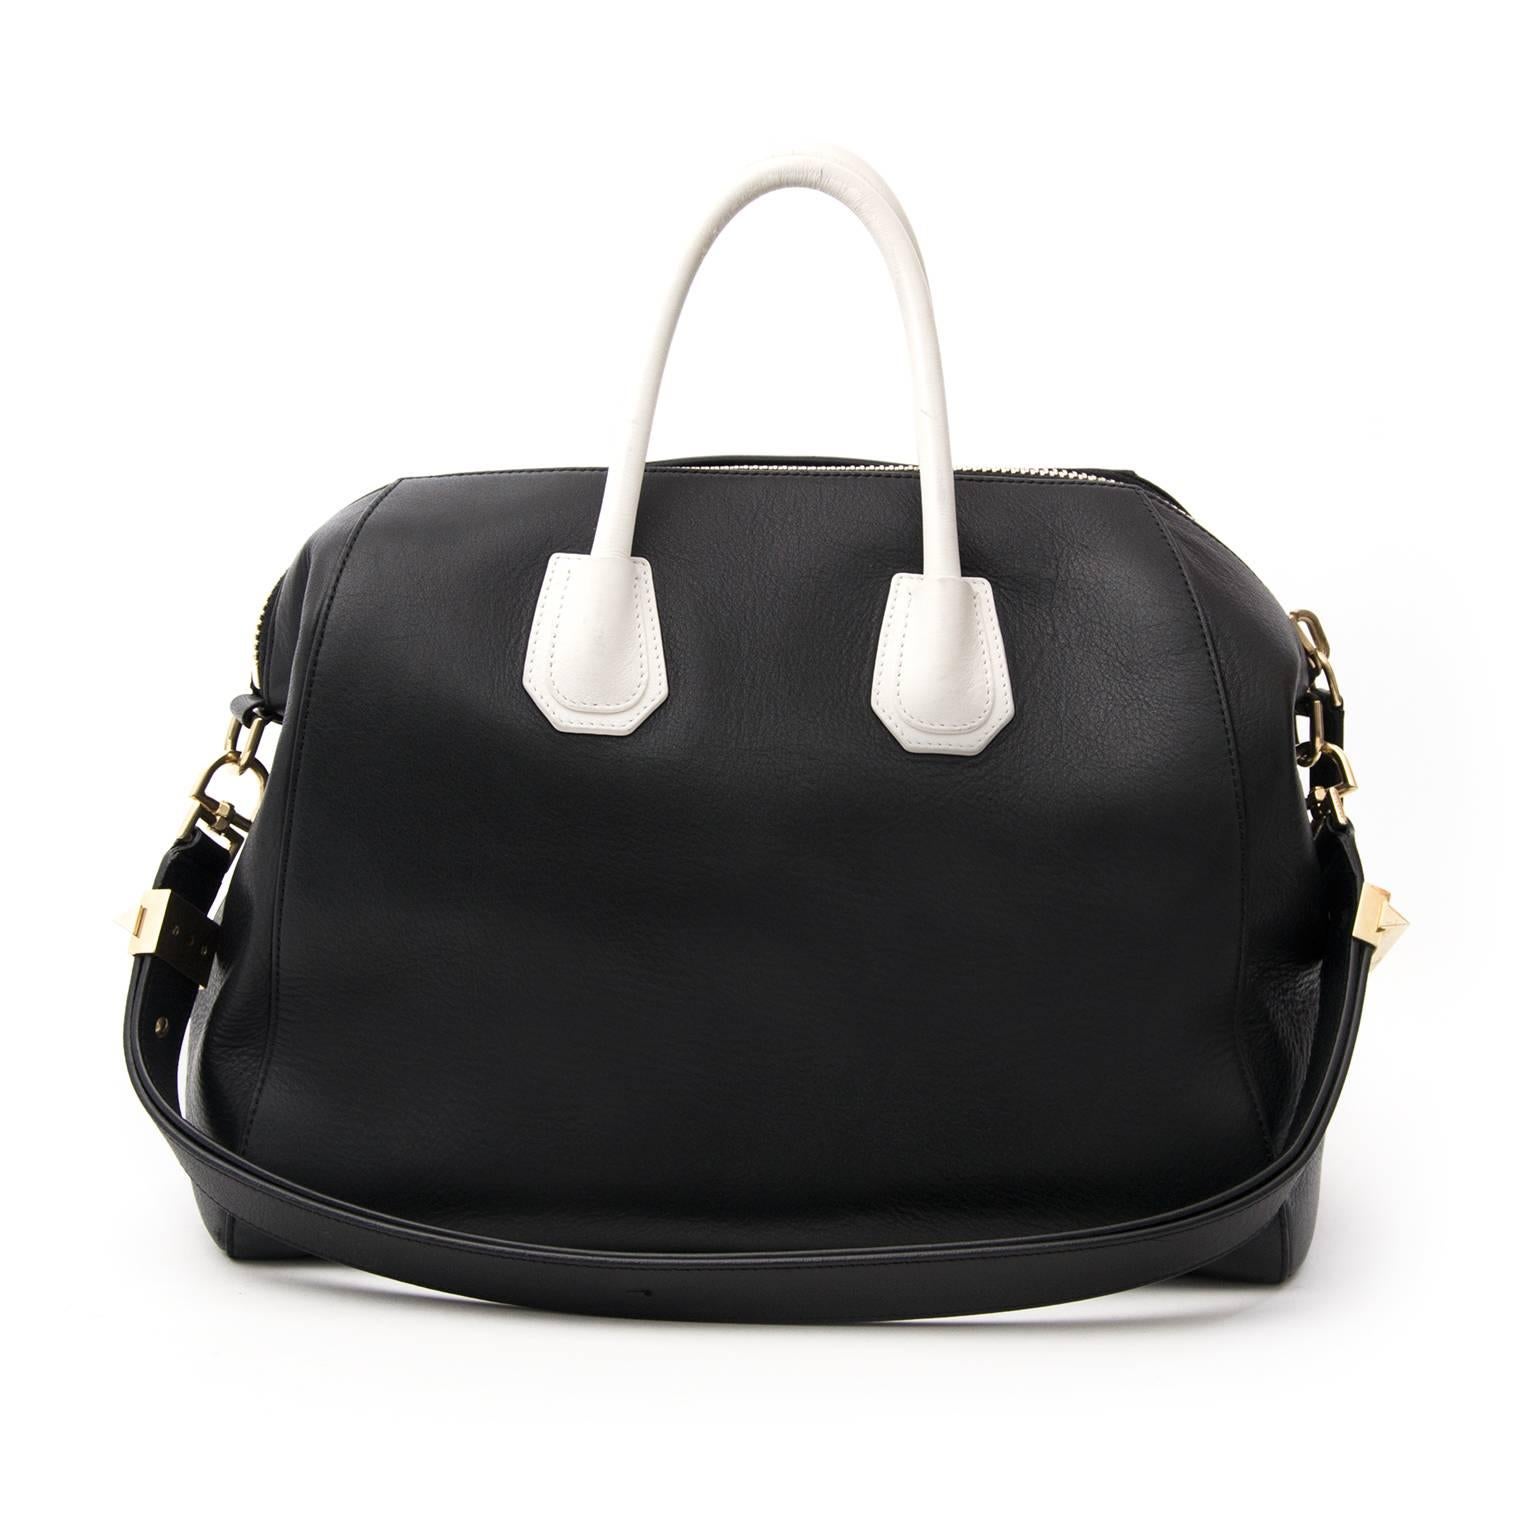 Givenchy Antigona leather bag in black and white with silver hardware. One of the label's most iconic styles. Very spacious bag with more then enough space for work or weekend essentials. Also features multiple pockets on the inside to keep smaller